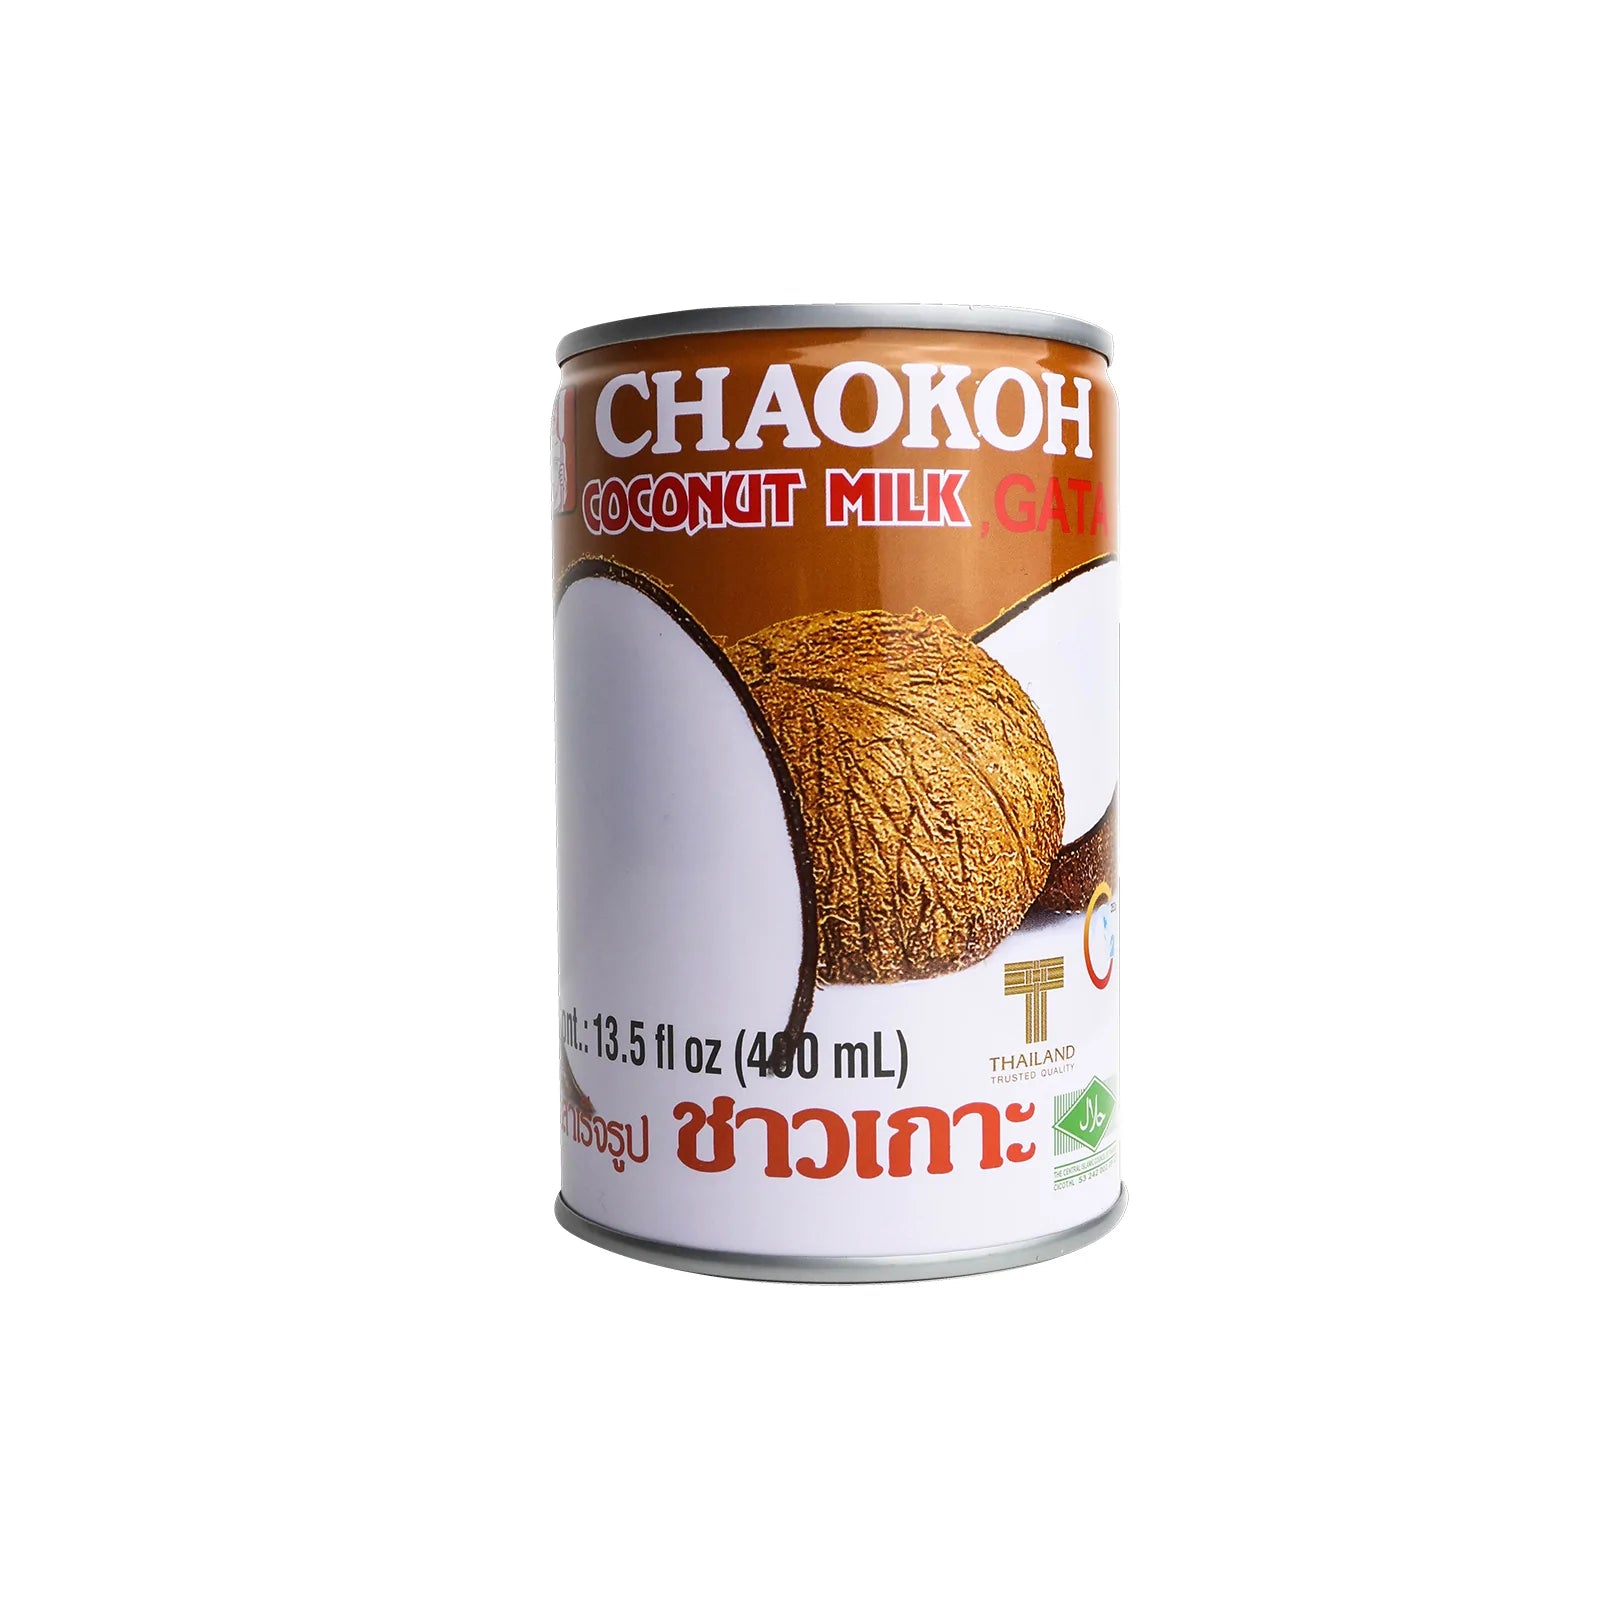 Chaokoh Coconut Milk, 13.5 Ounce (Pack of 6) by Chaokoh